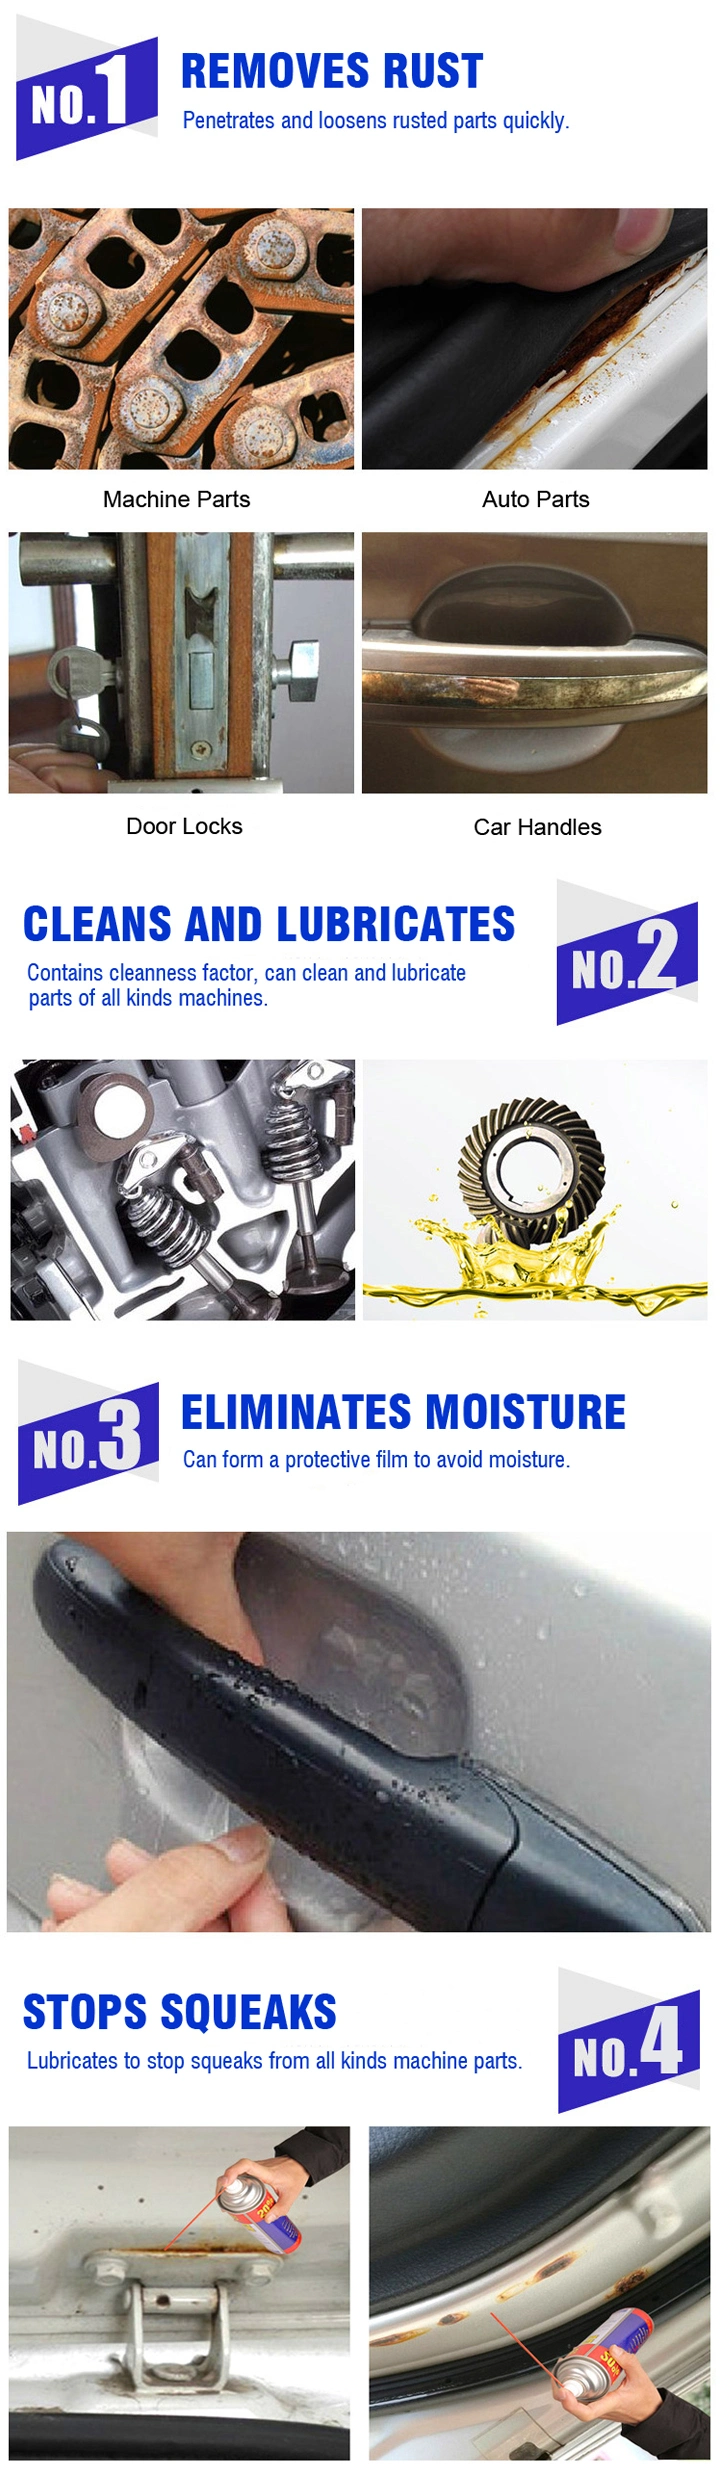 Auto Rust Remover Rust Proofing Oil Anti Rust Chemical